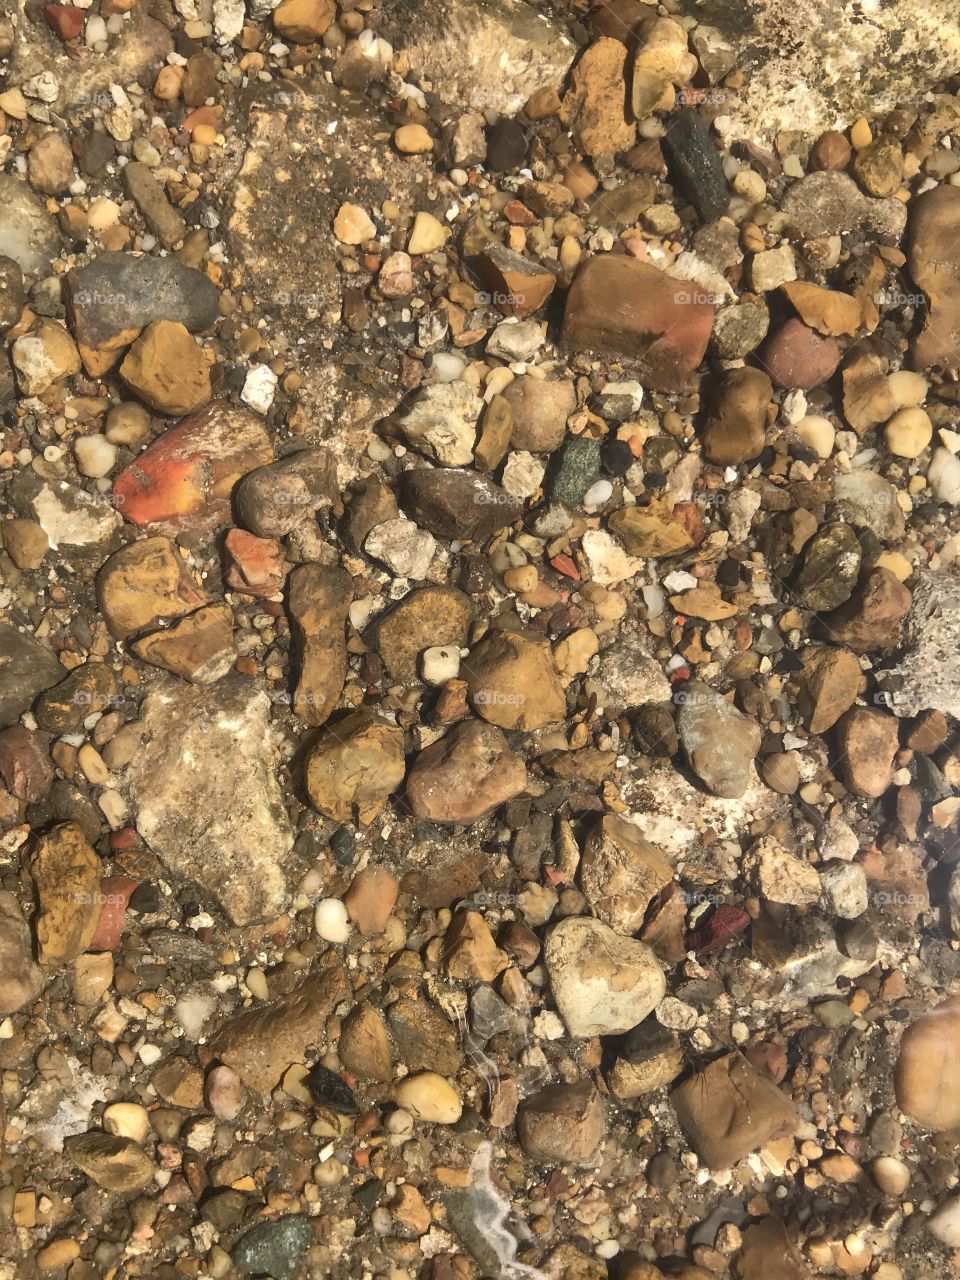 Rocks and pebbles in a creek